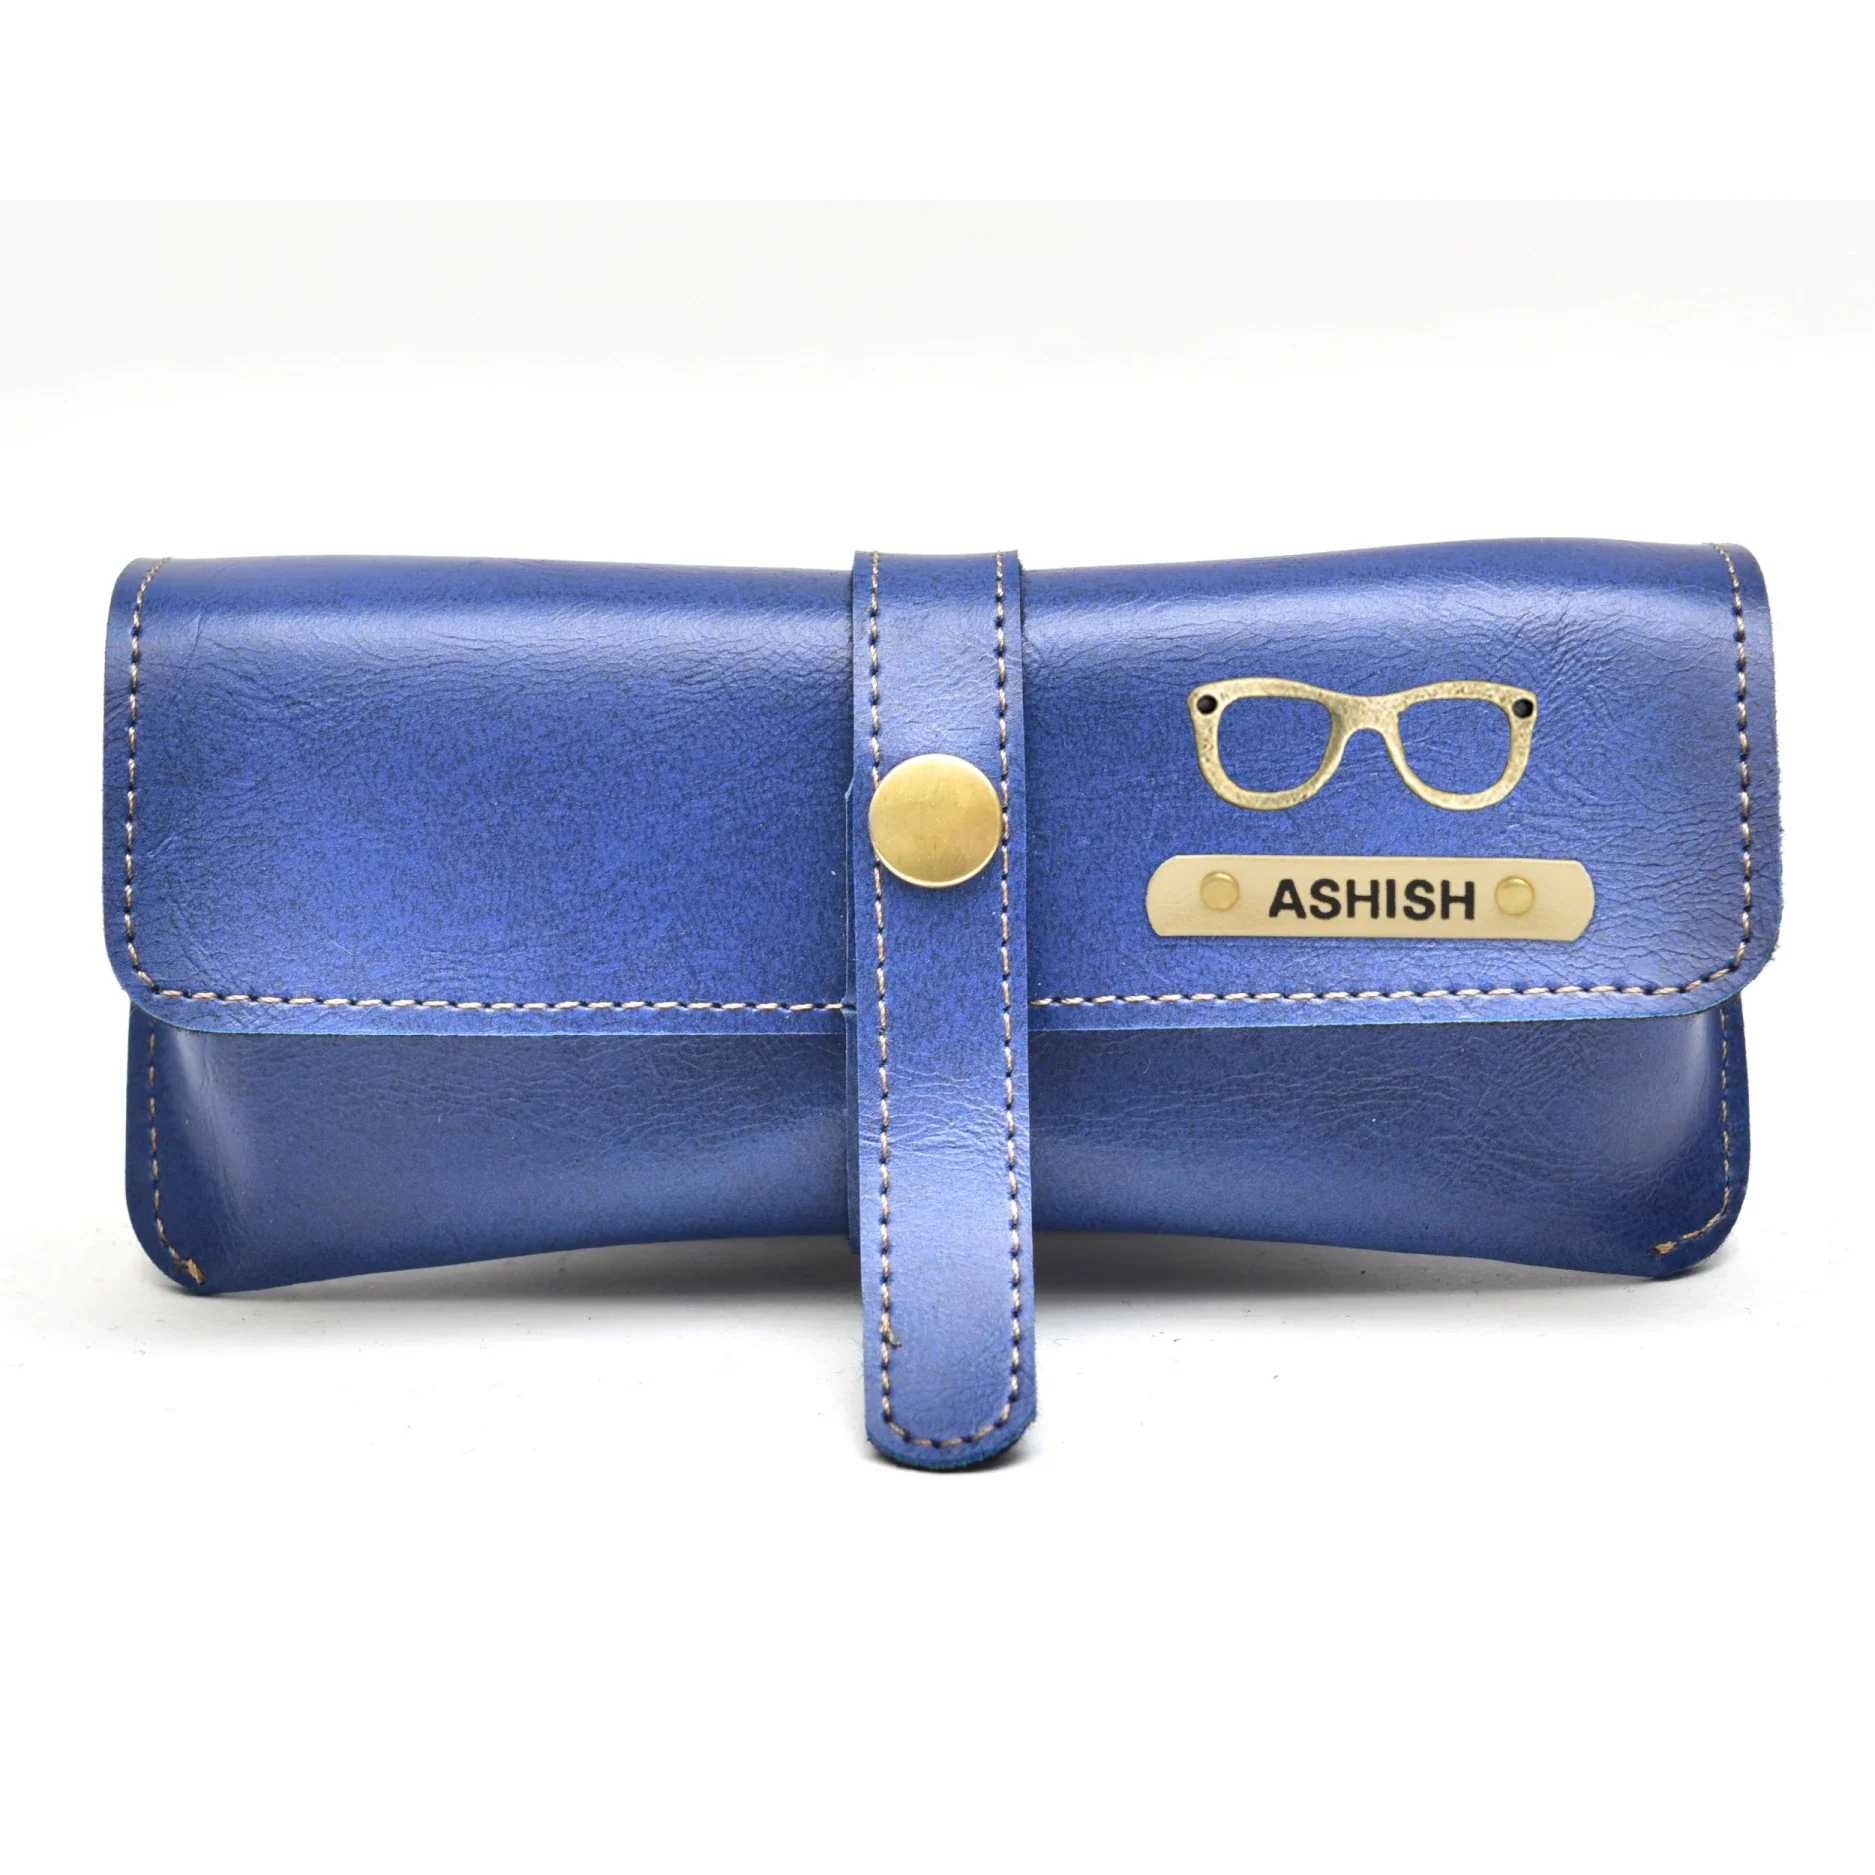 Our eyewear case is perfect for travel, keeping your glasses safe and secure while on-the-go.